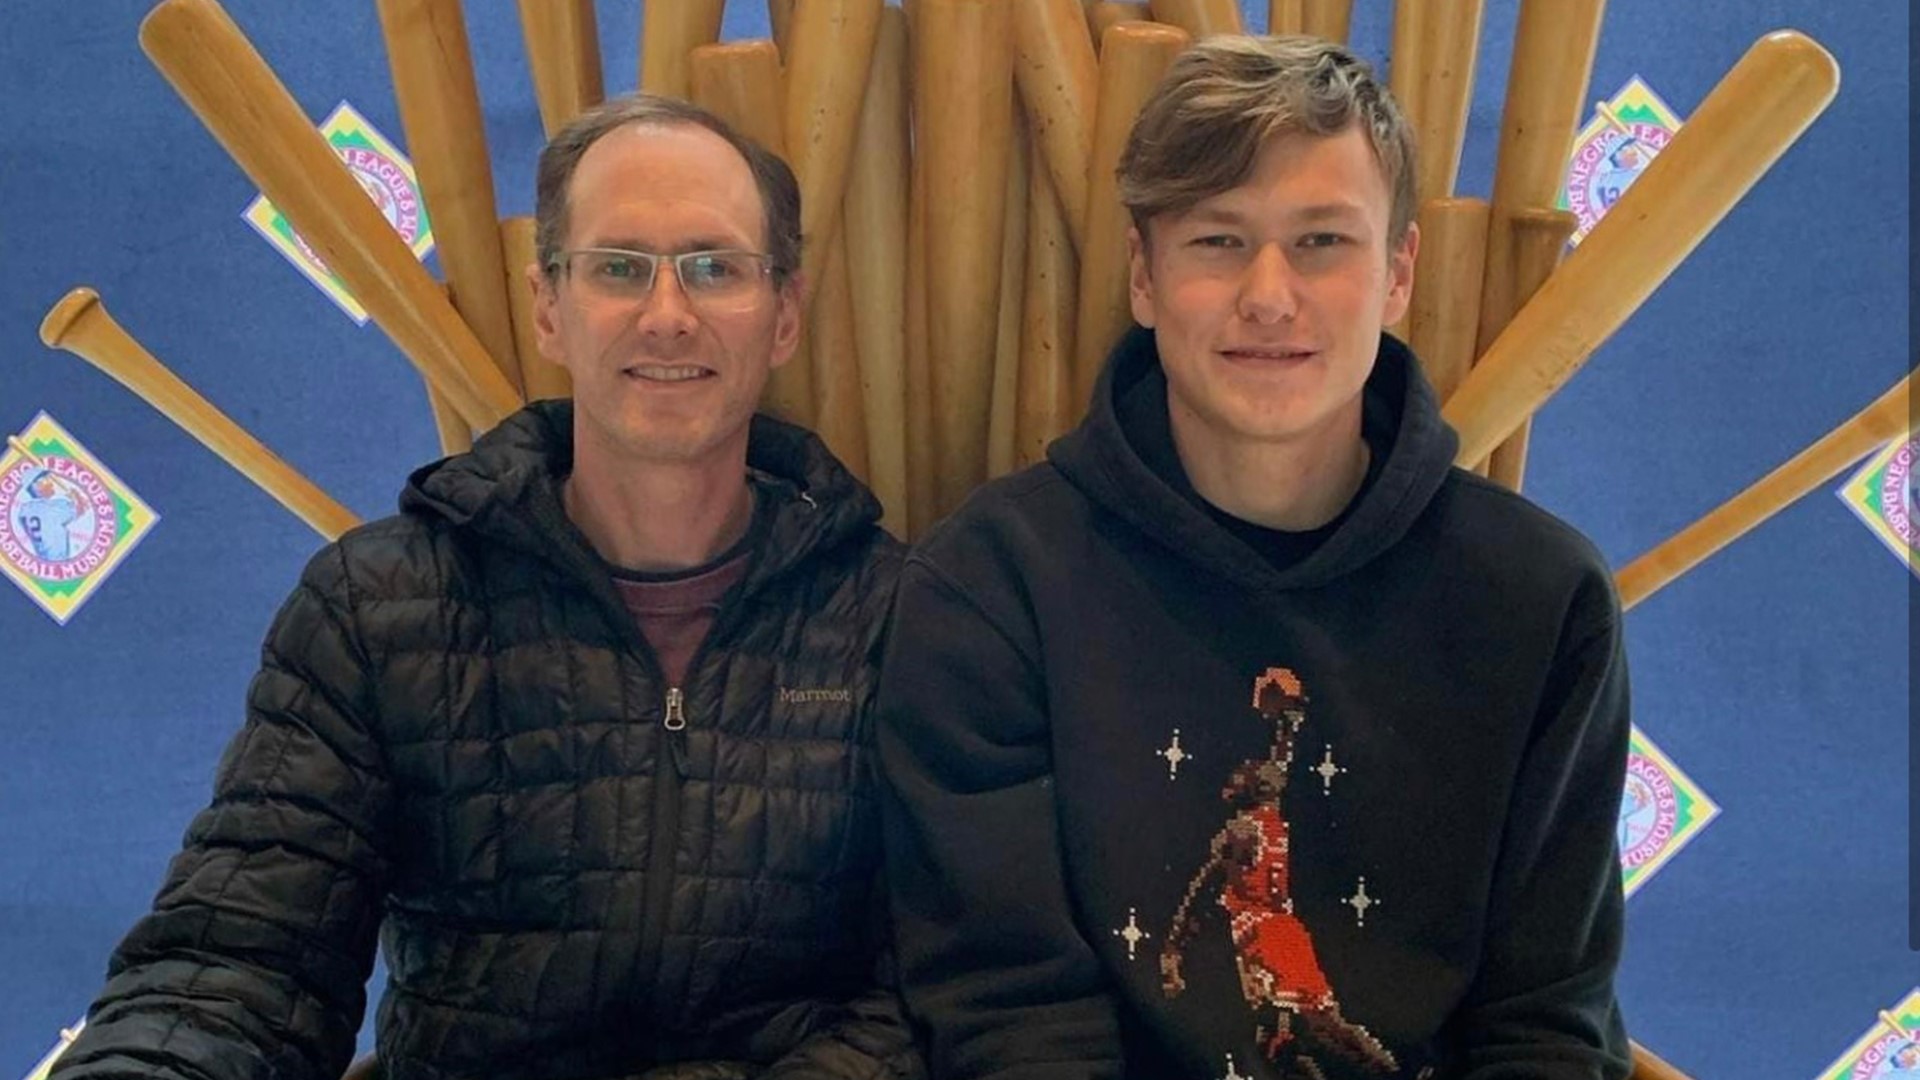 The Benton County Sheriff's Office says they've been searching for a missing father and son since the afternoon of March 16.